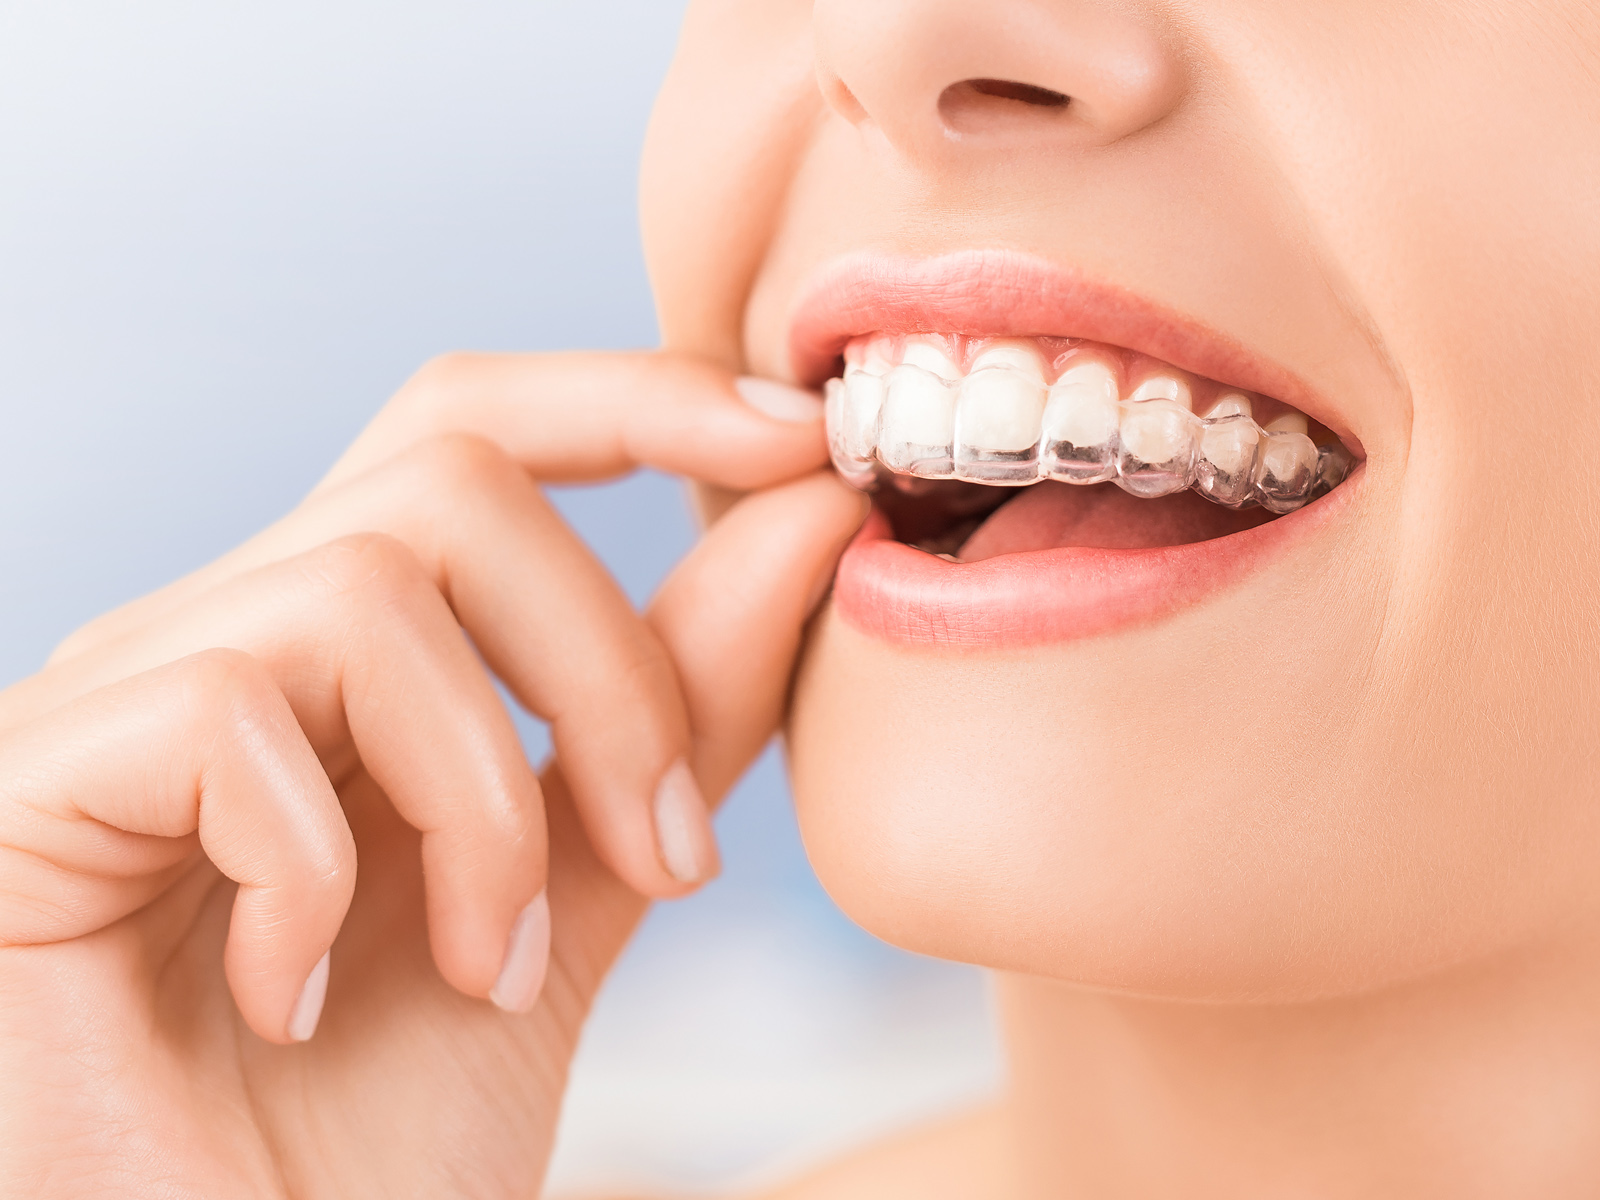 How long do Invisalign impressions take?